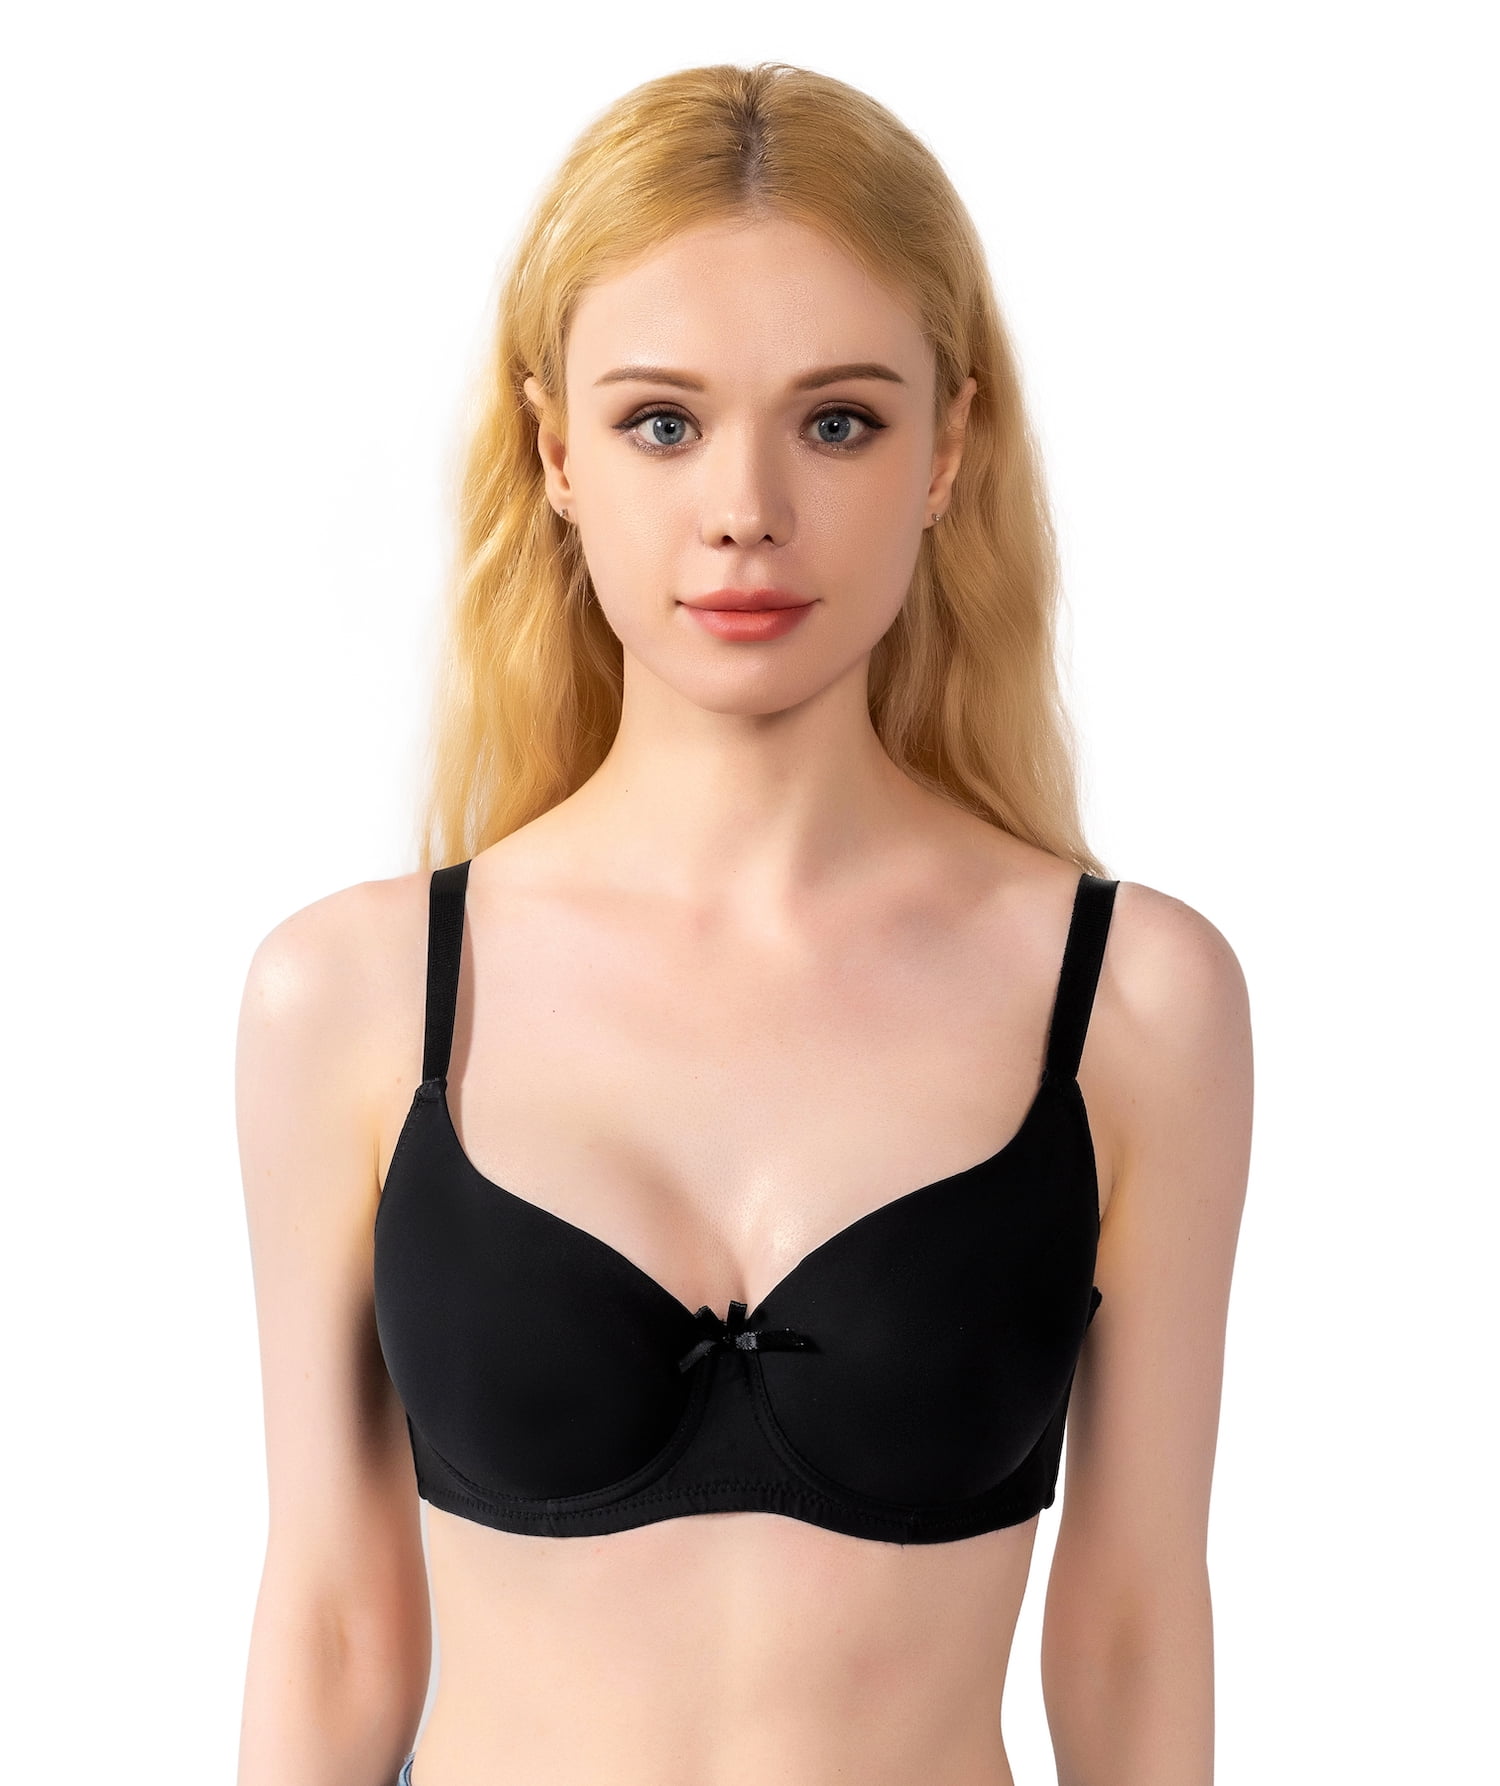 Women Bras 6 pack of T-shirt Bra B cup C cup D cup DD cup Size 42DD (6843)